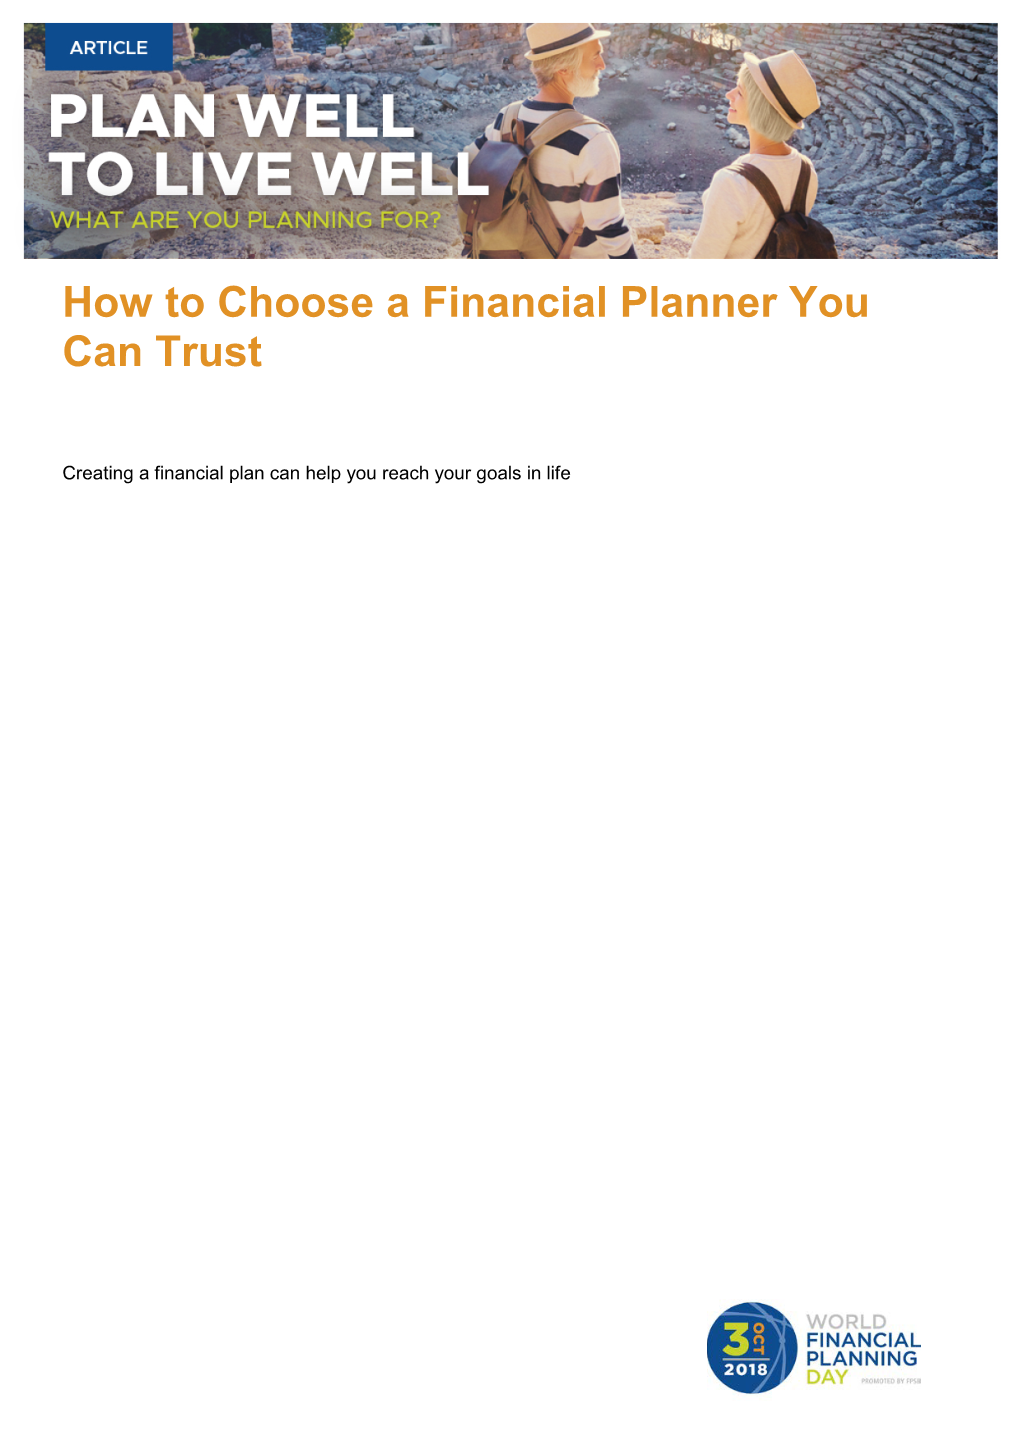 How to Choose a Financial Planner You Can Trust